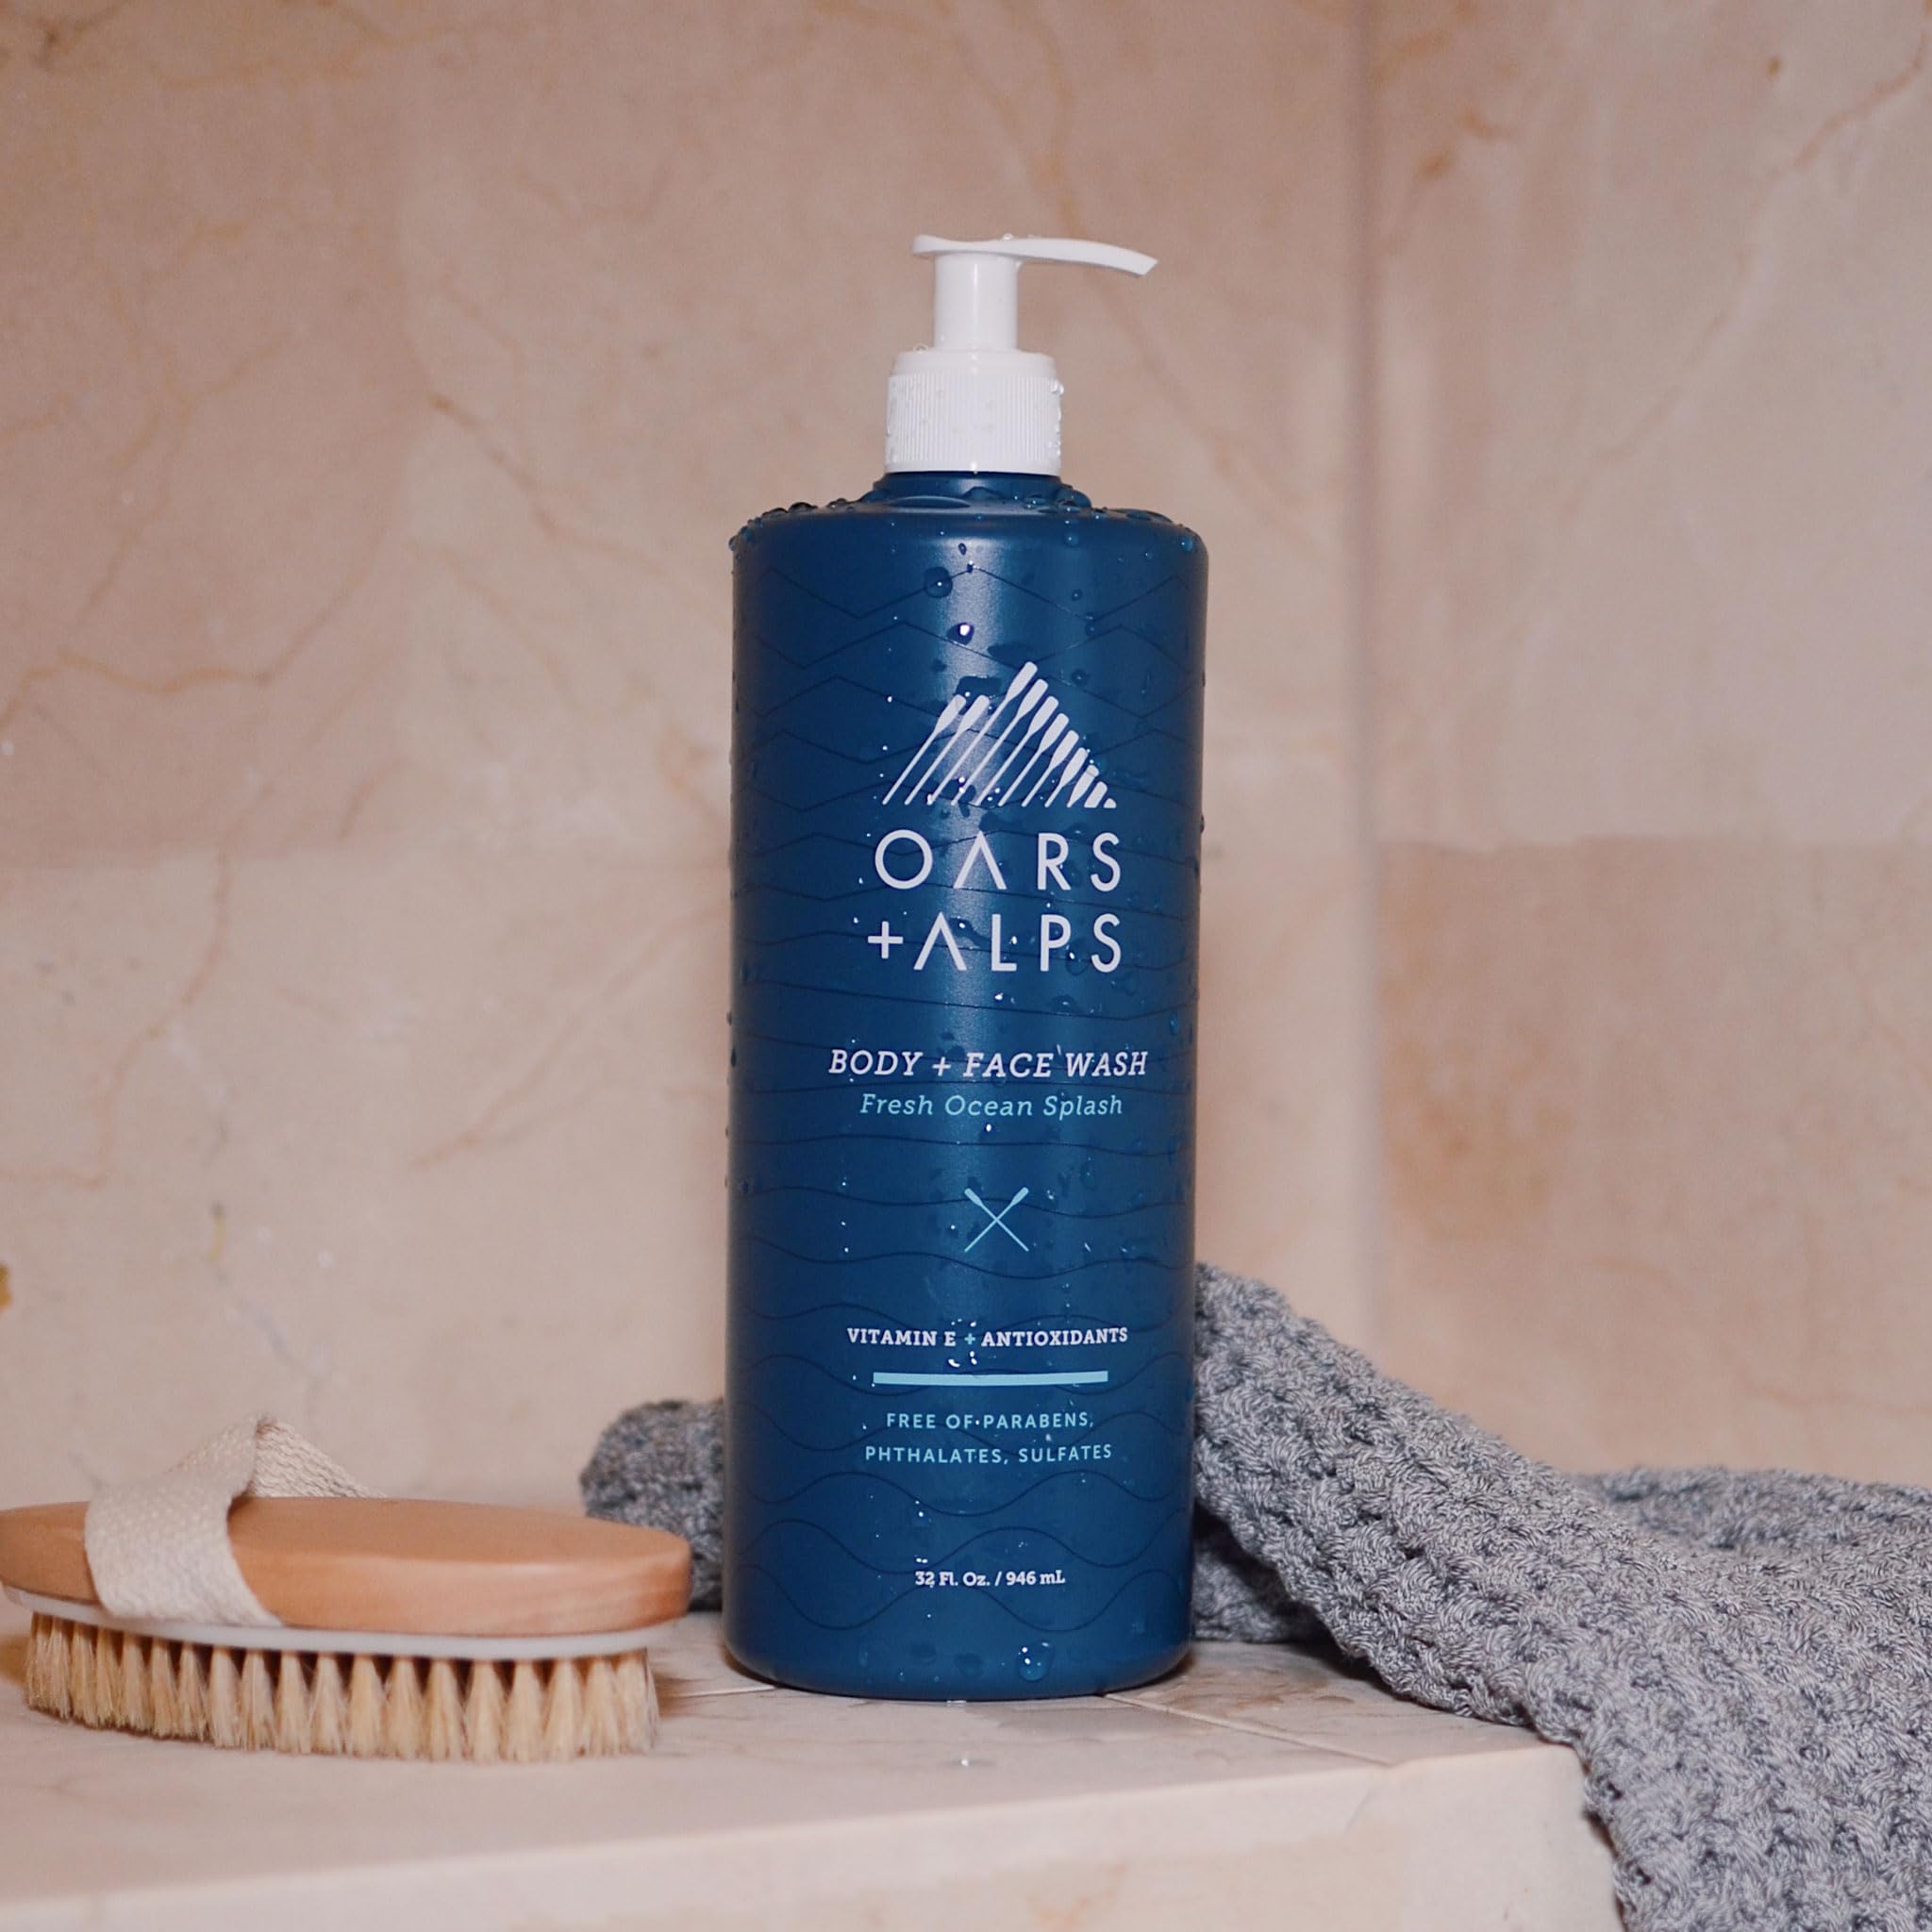 Oars + Alps Mens Moisturizing Body and Face Wash, Skin Care Infused with Vitamin E and Antioxidants, Sulfate Free, Fresh Ocean Splash 32oz